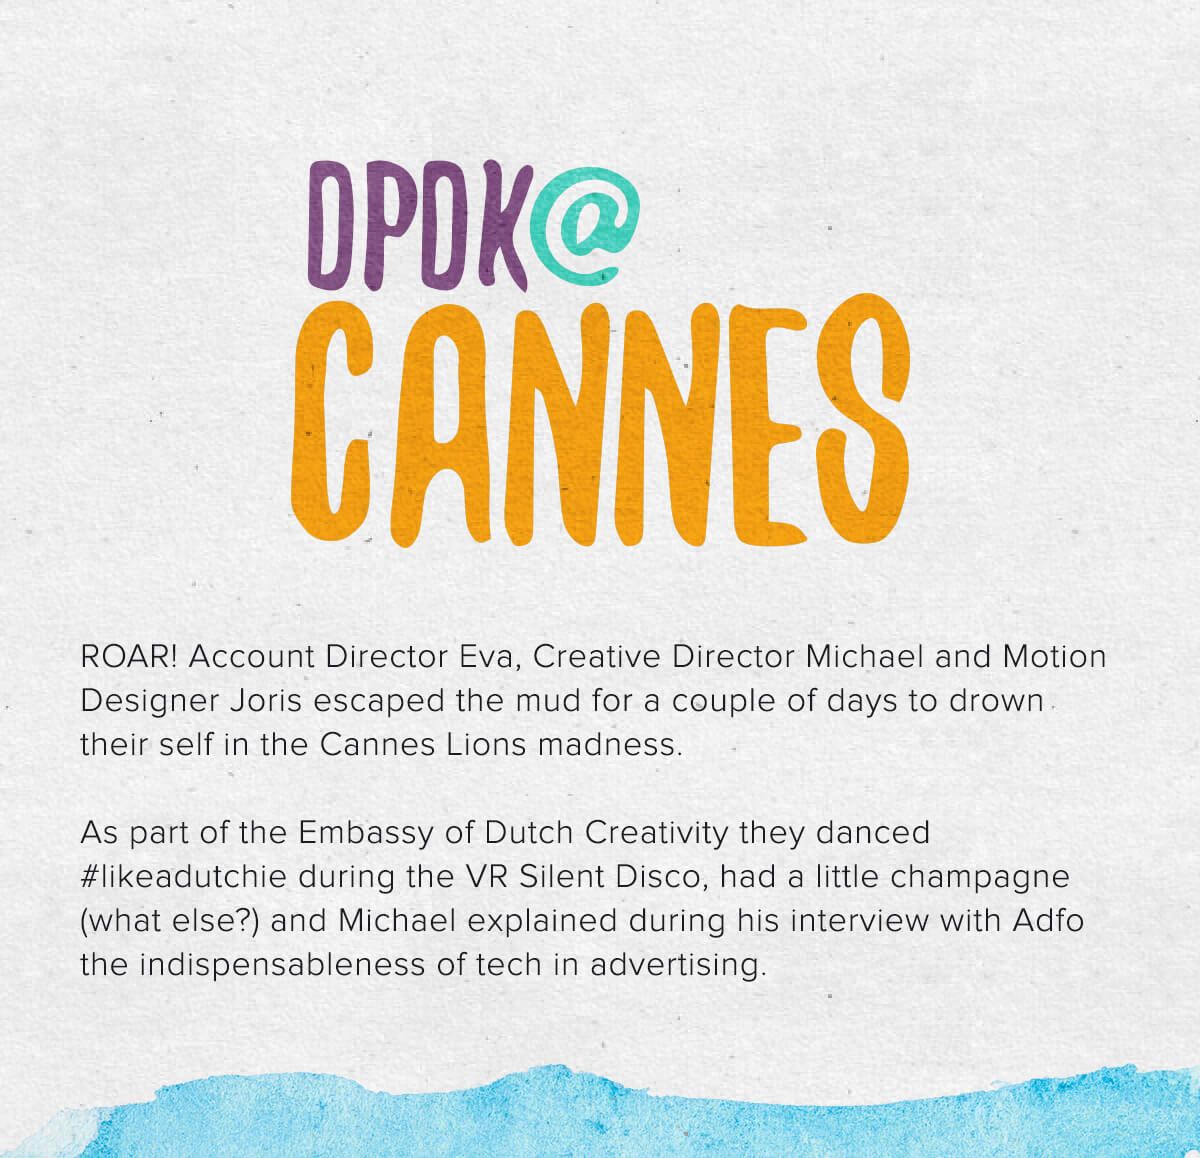 DPDK at Cannes